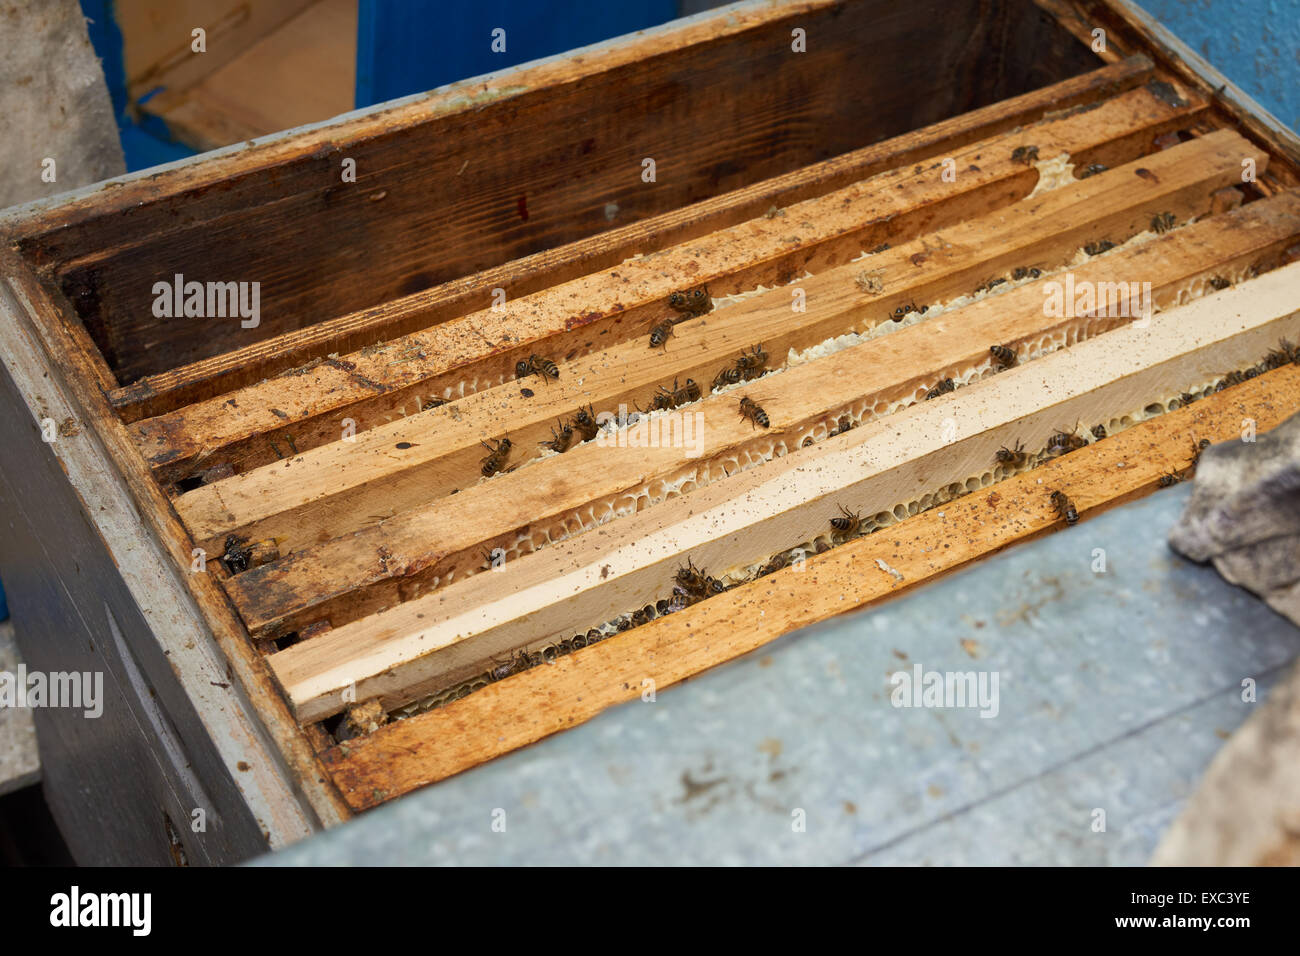 Upper view at the opened beehive with frames and worker bees it Stock Photo